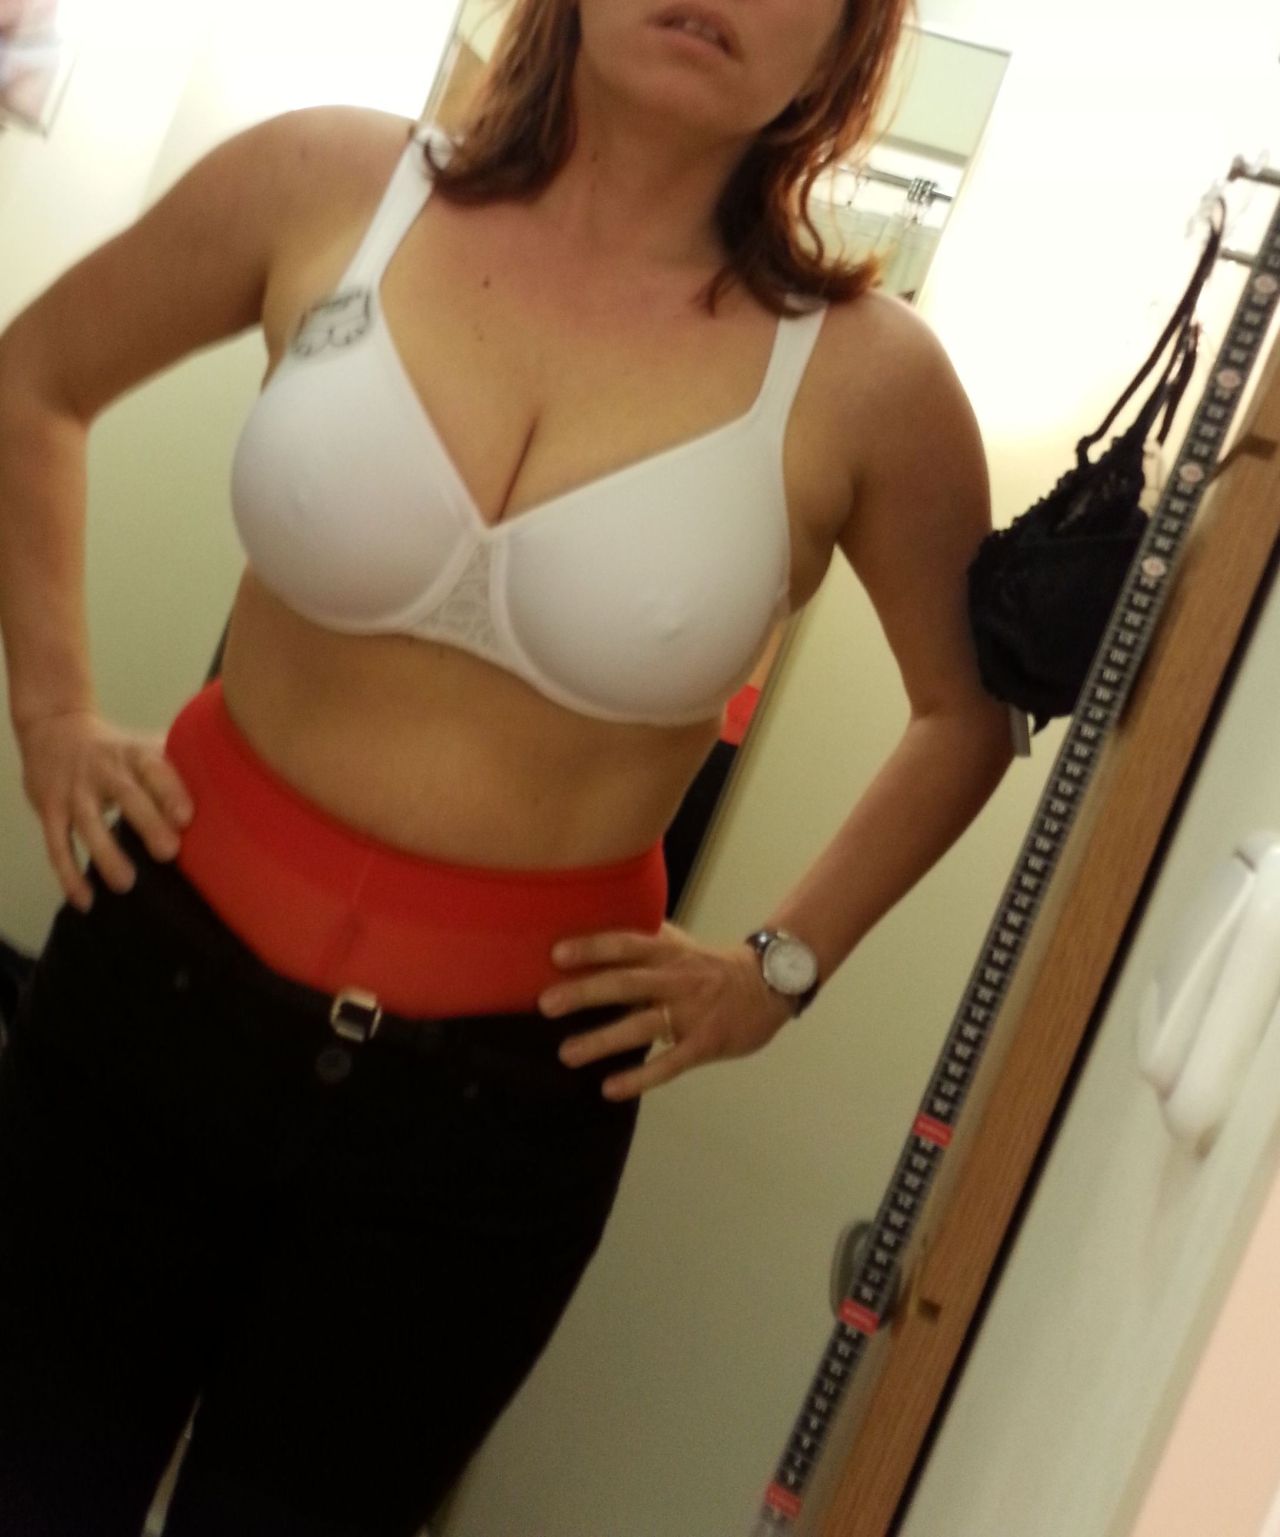 pantyhose-fun:  nice catch in the dressing room  Send your own cell pics to fyeahcellpics